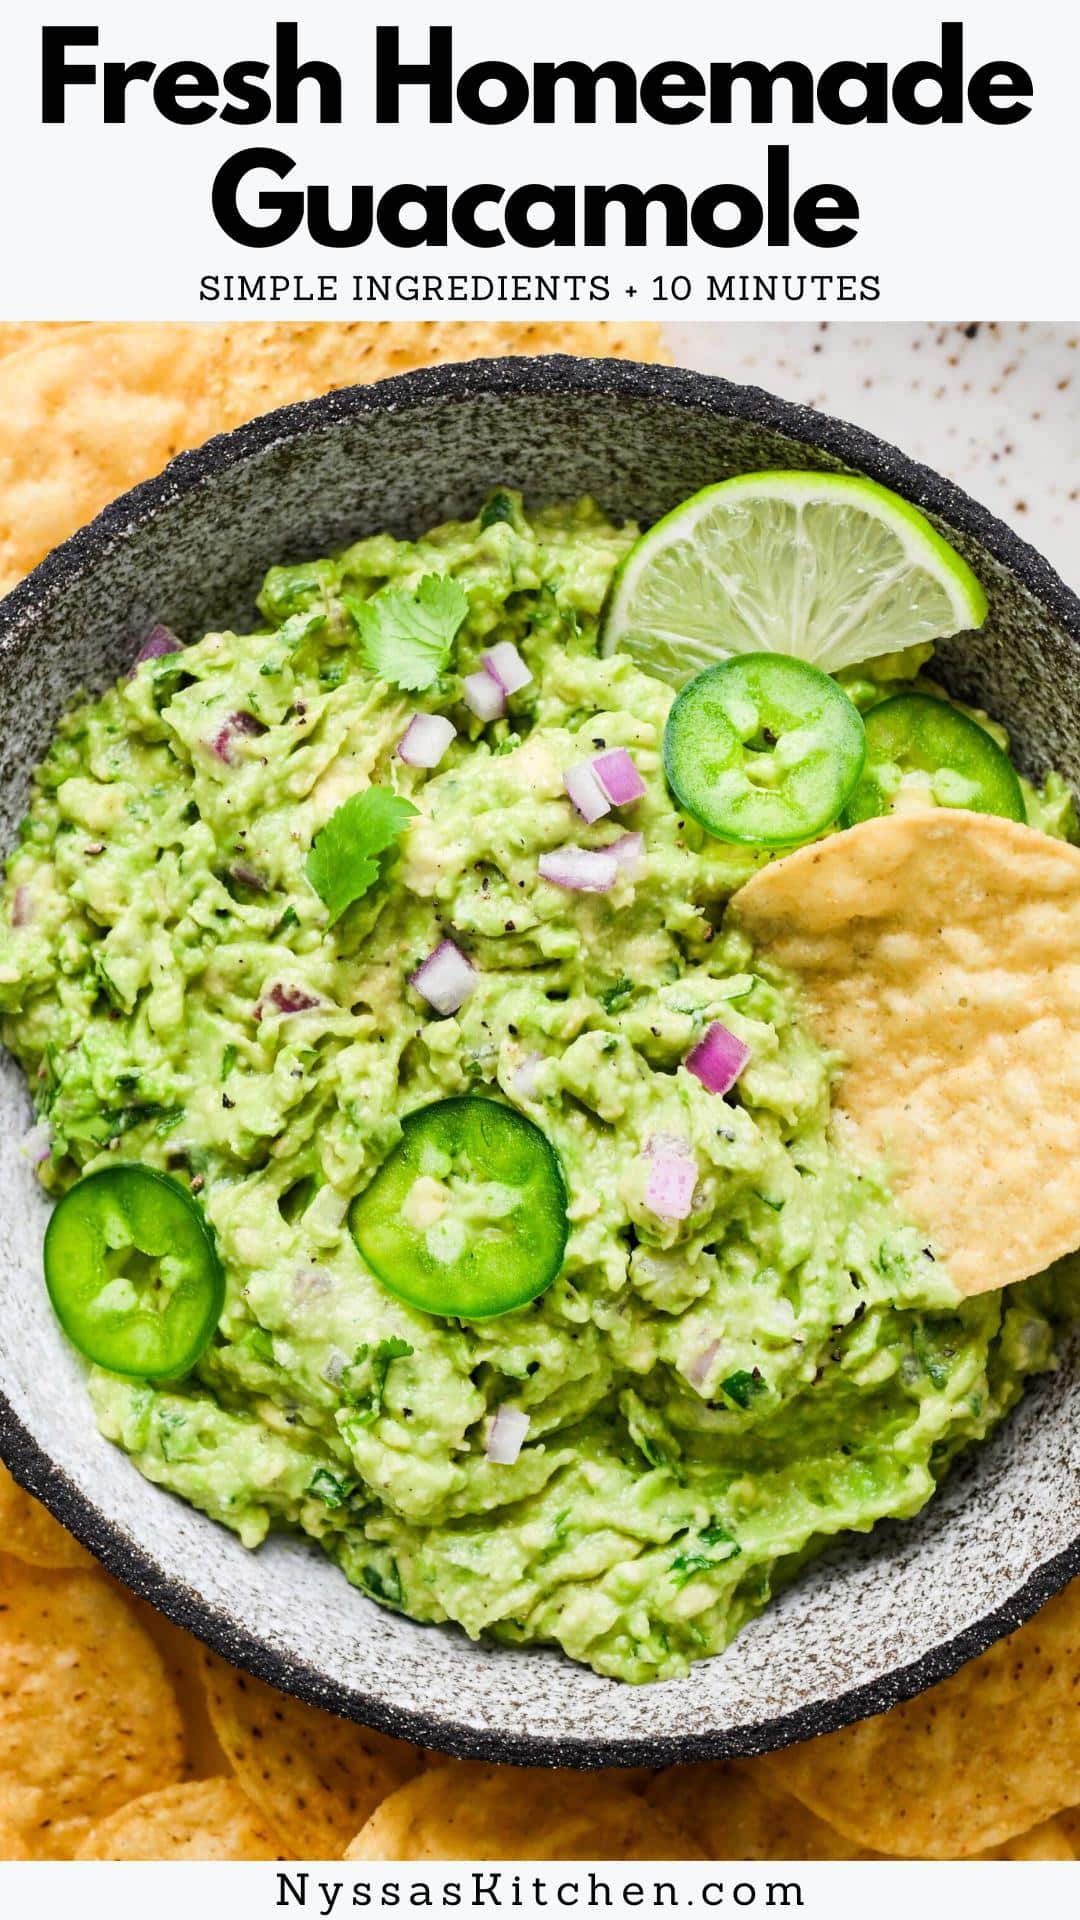 You're going to love this easy guacamole recipe! Made from scratch with fresh and flavorful ingredients including perfectly ripe avocado, cilantro, red onion, jalapeño, and lime juice. It is zesty, SO delish, and ready in less than 10 minutes.